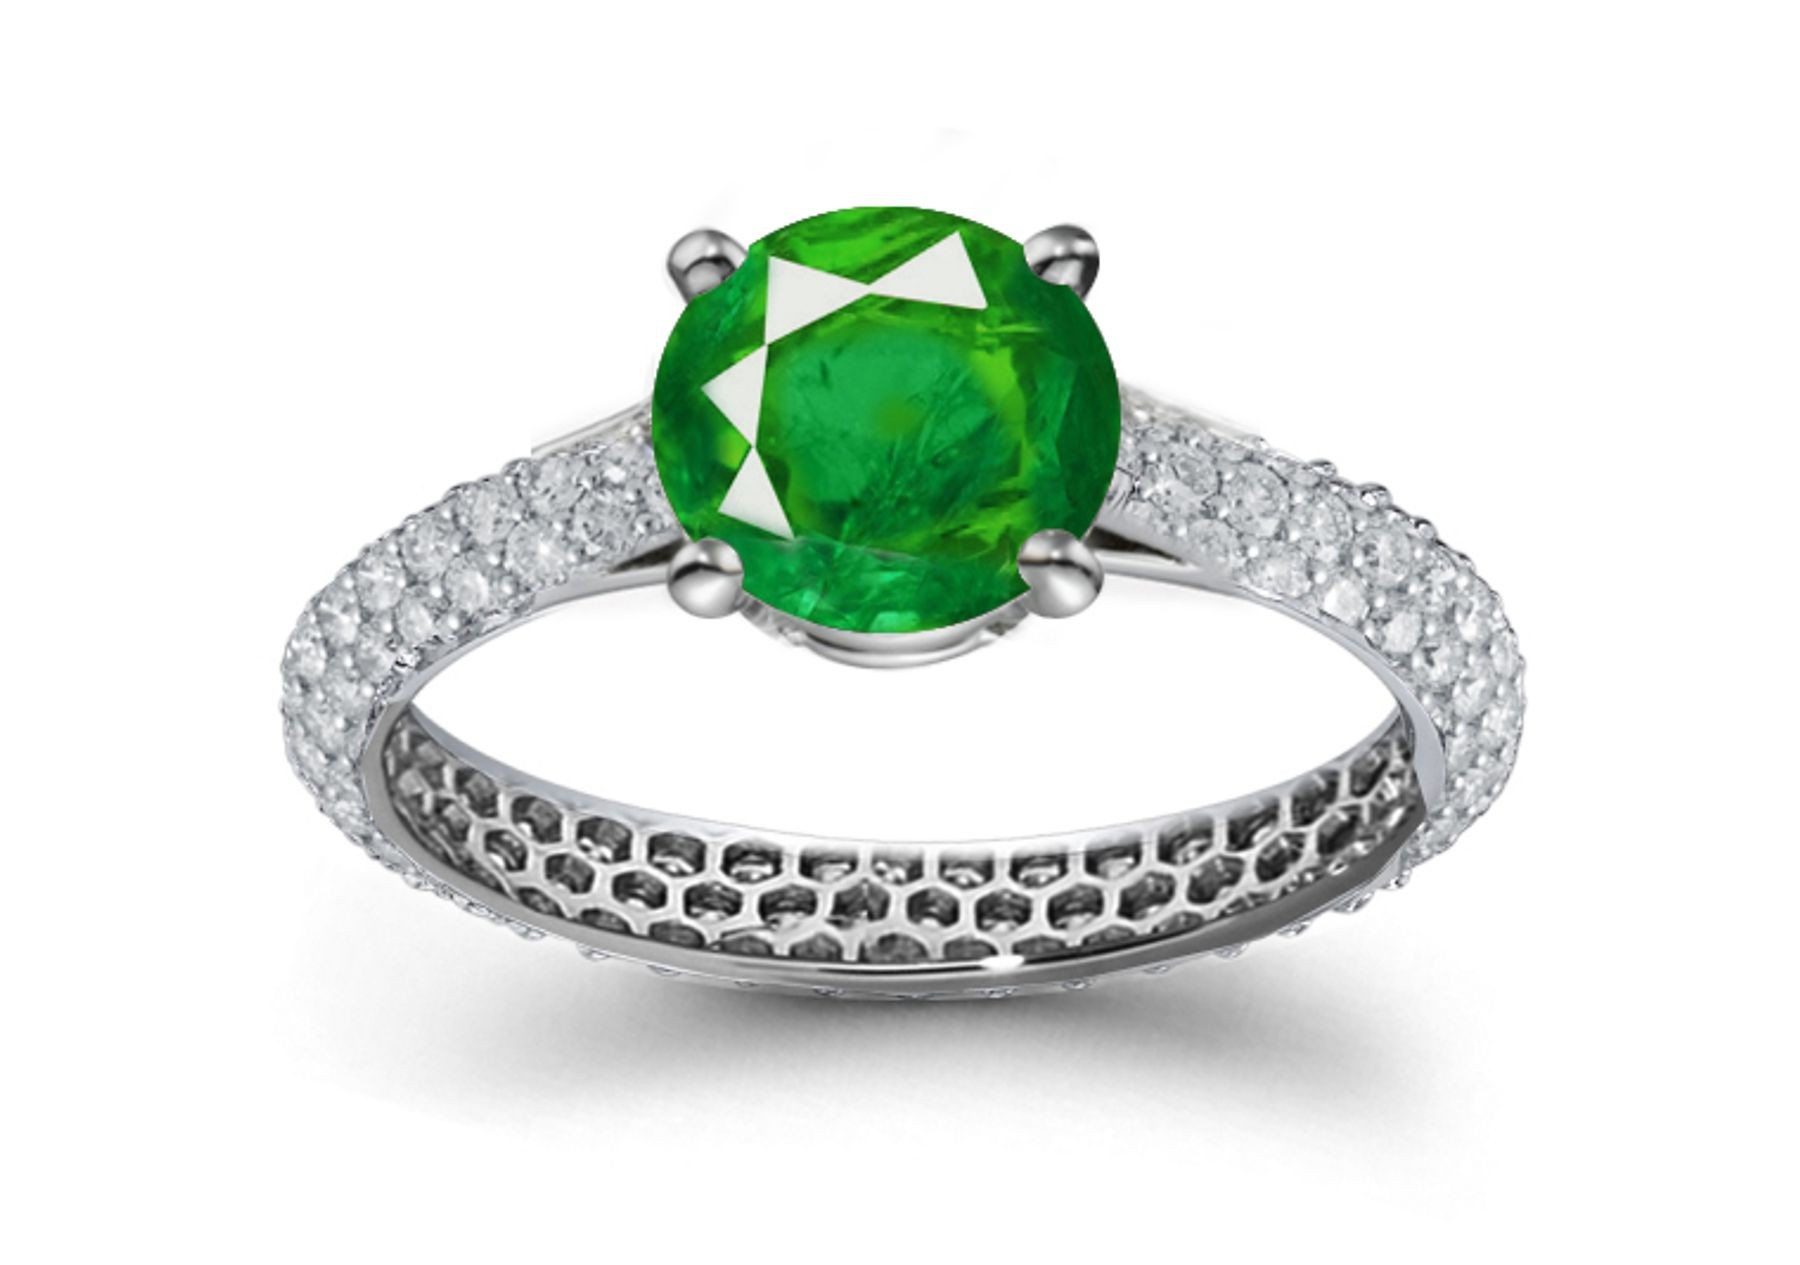 New French Styles: Old 'Balzac' & "Voltair"e French Pave' Brilliant Emerald & Geniuine Diamond Ring in 14k White Gold 2.78 - 2.80 cts